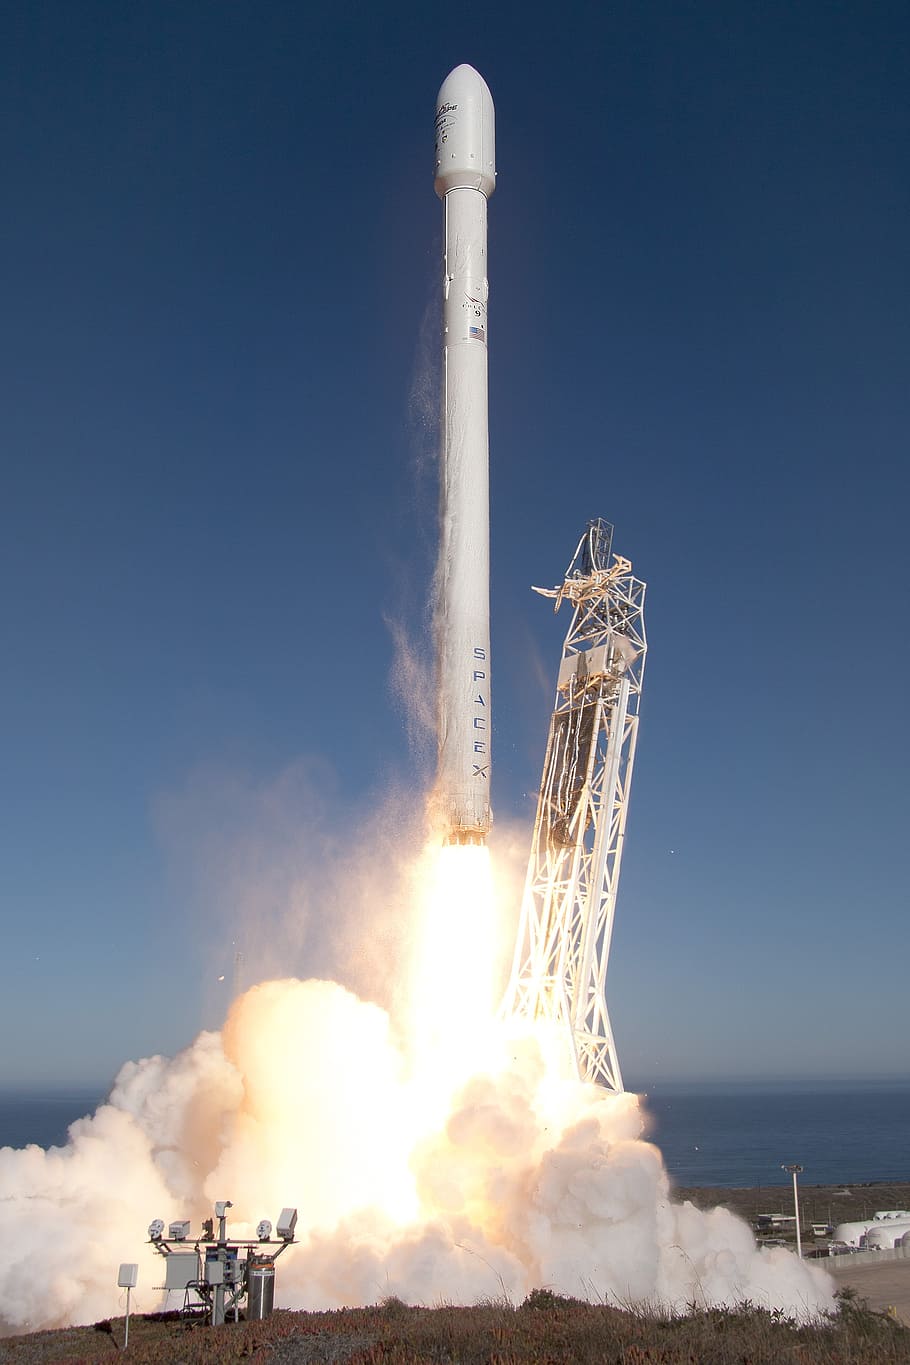 launching white rocket, lift-off, rocket launch, spacex, flames